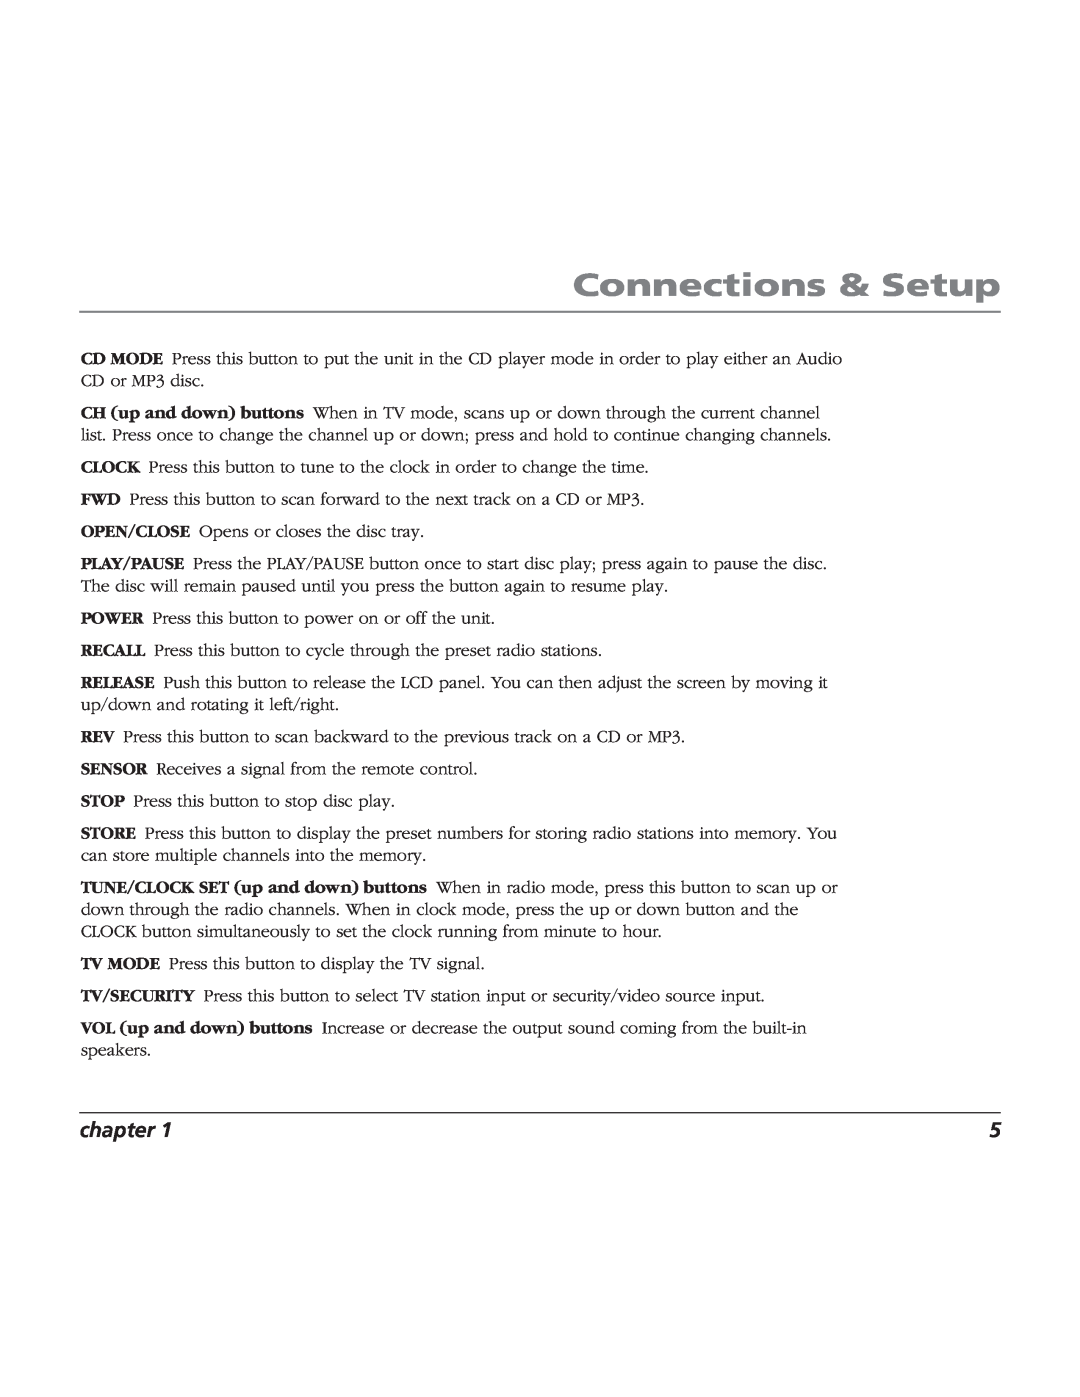 RCA TV/Radio/CD Player user manual Connections & Setup, chapter 